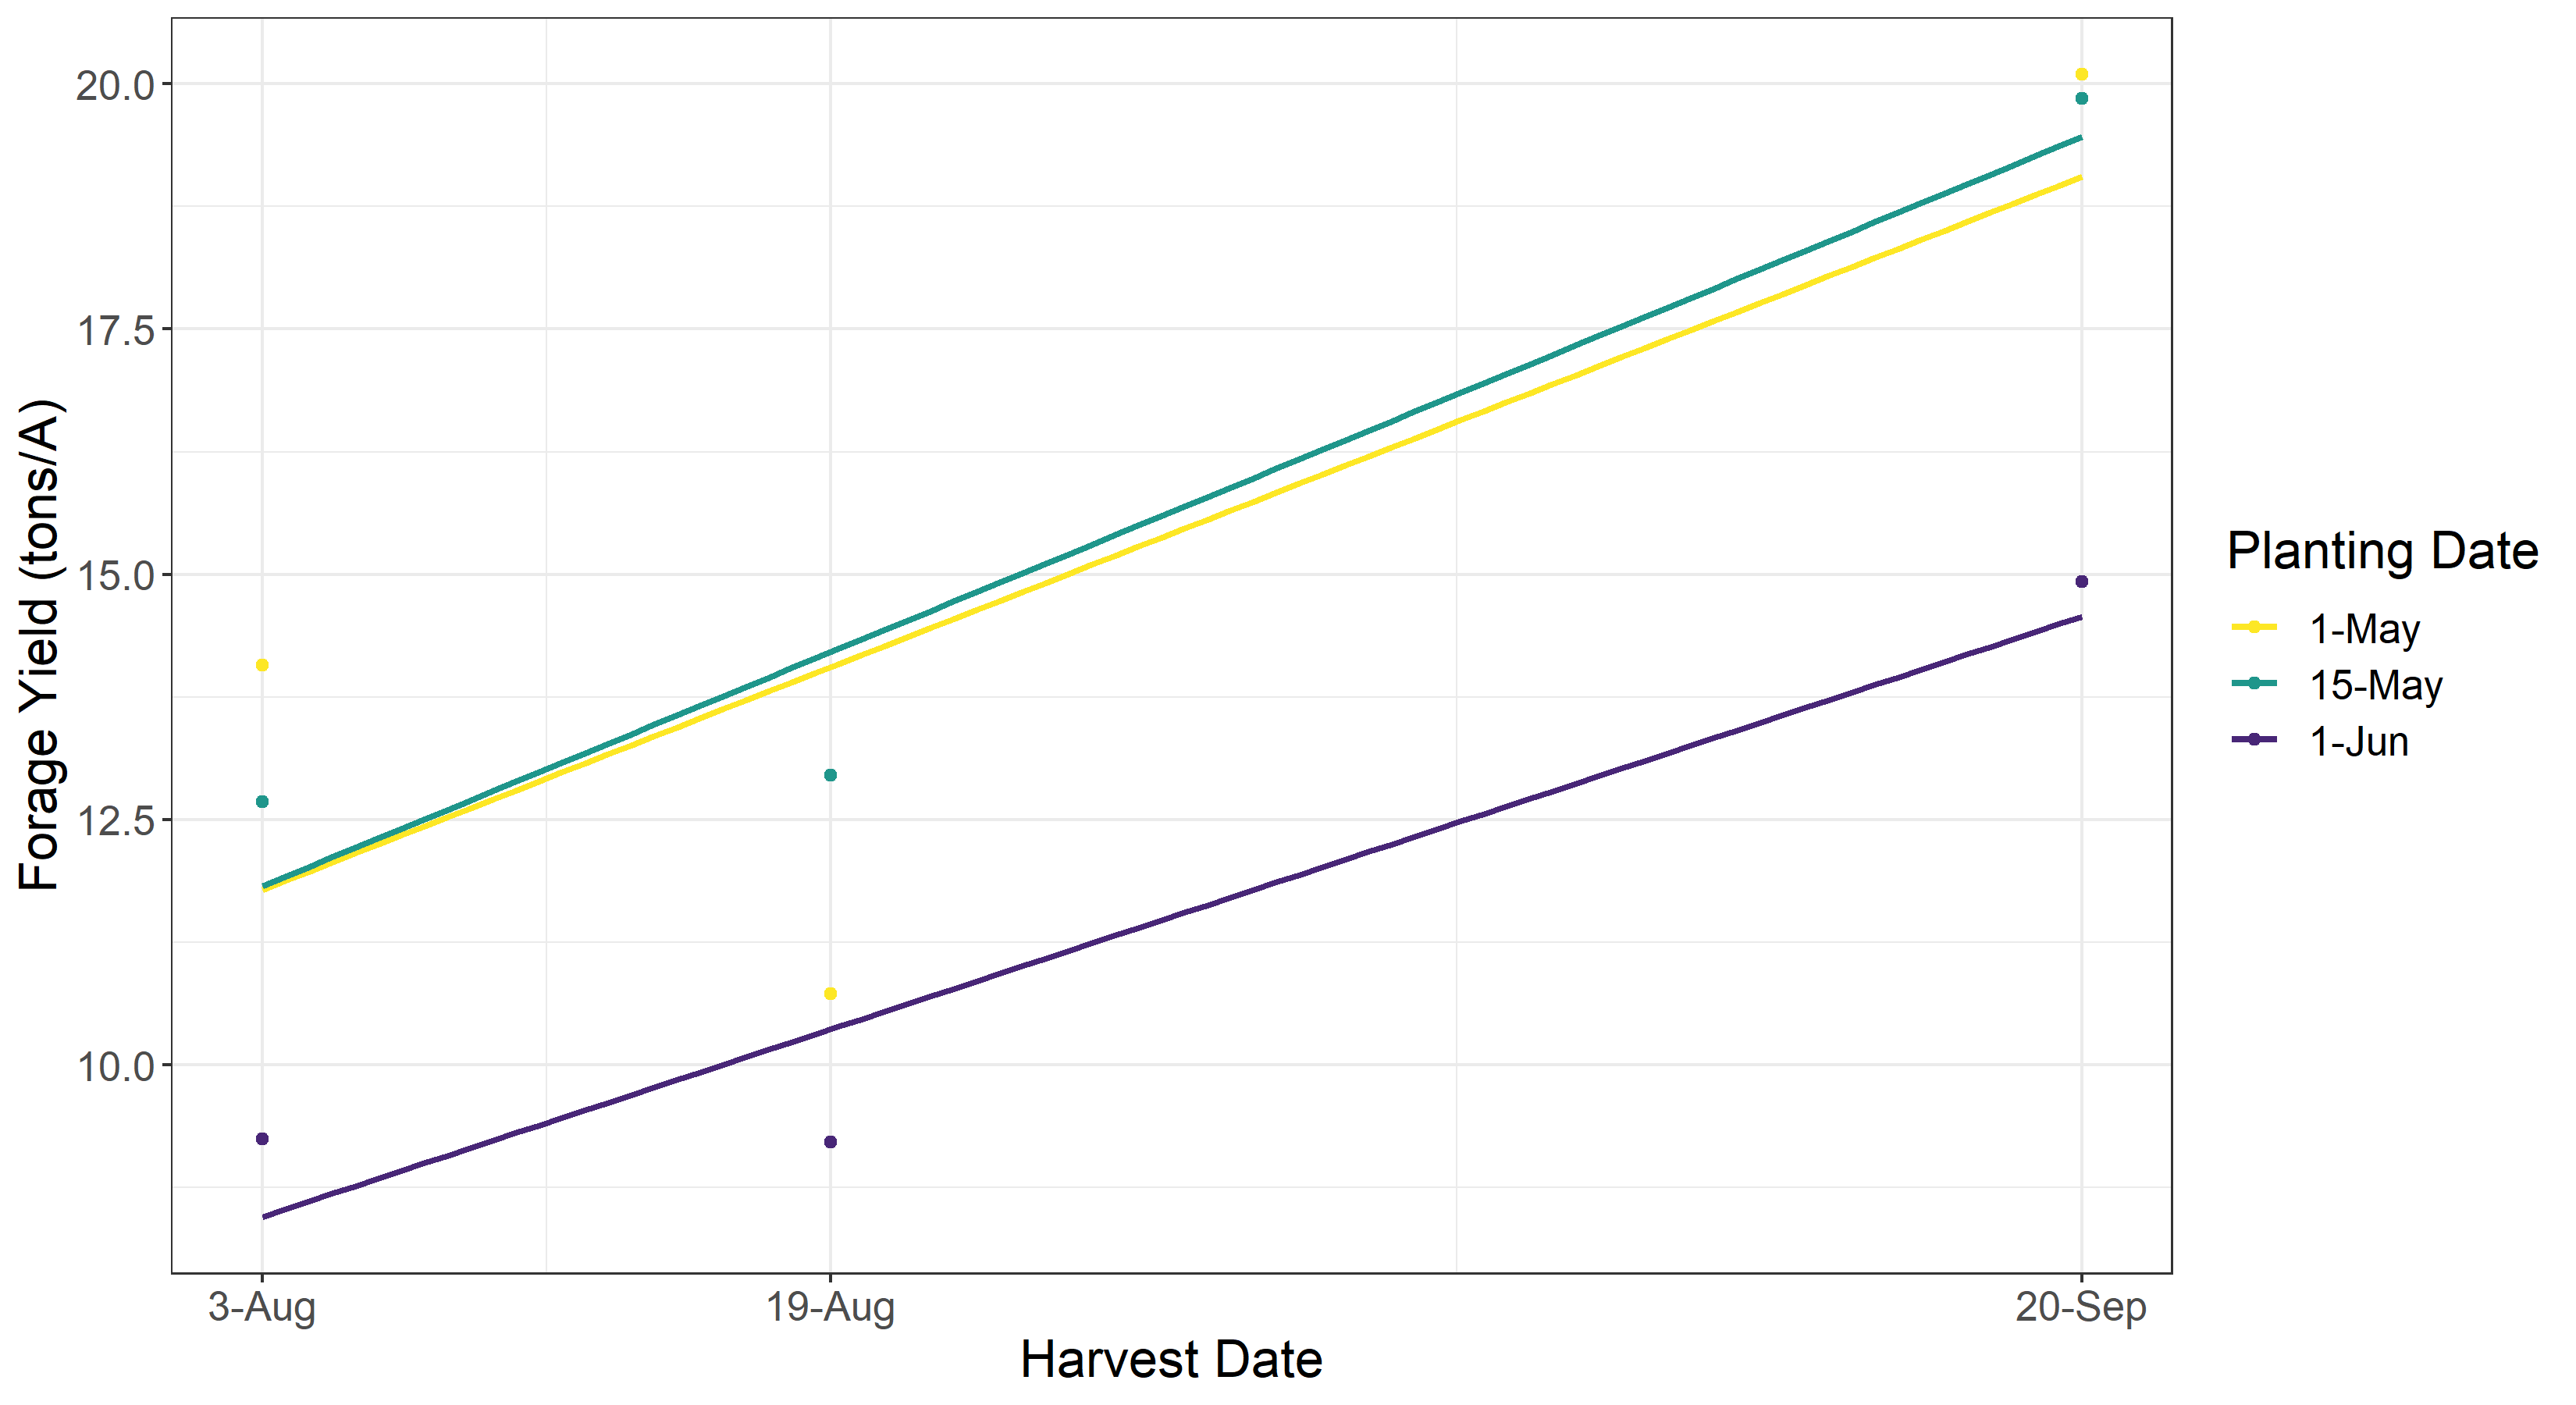 Linear model showing the forage yield by planting date over harvest date